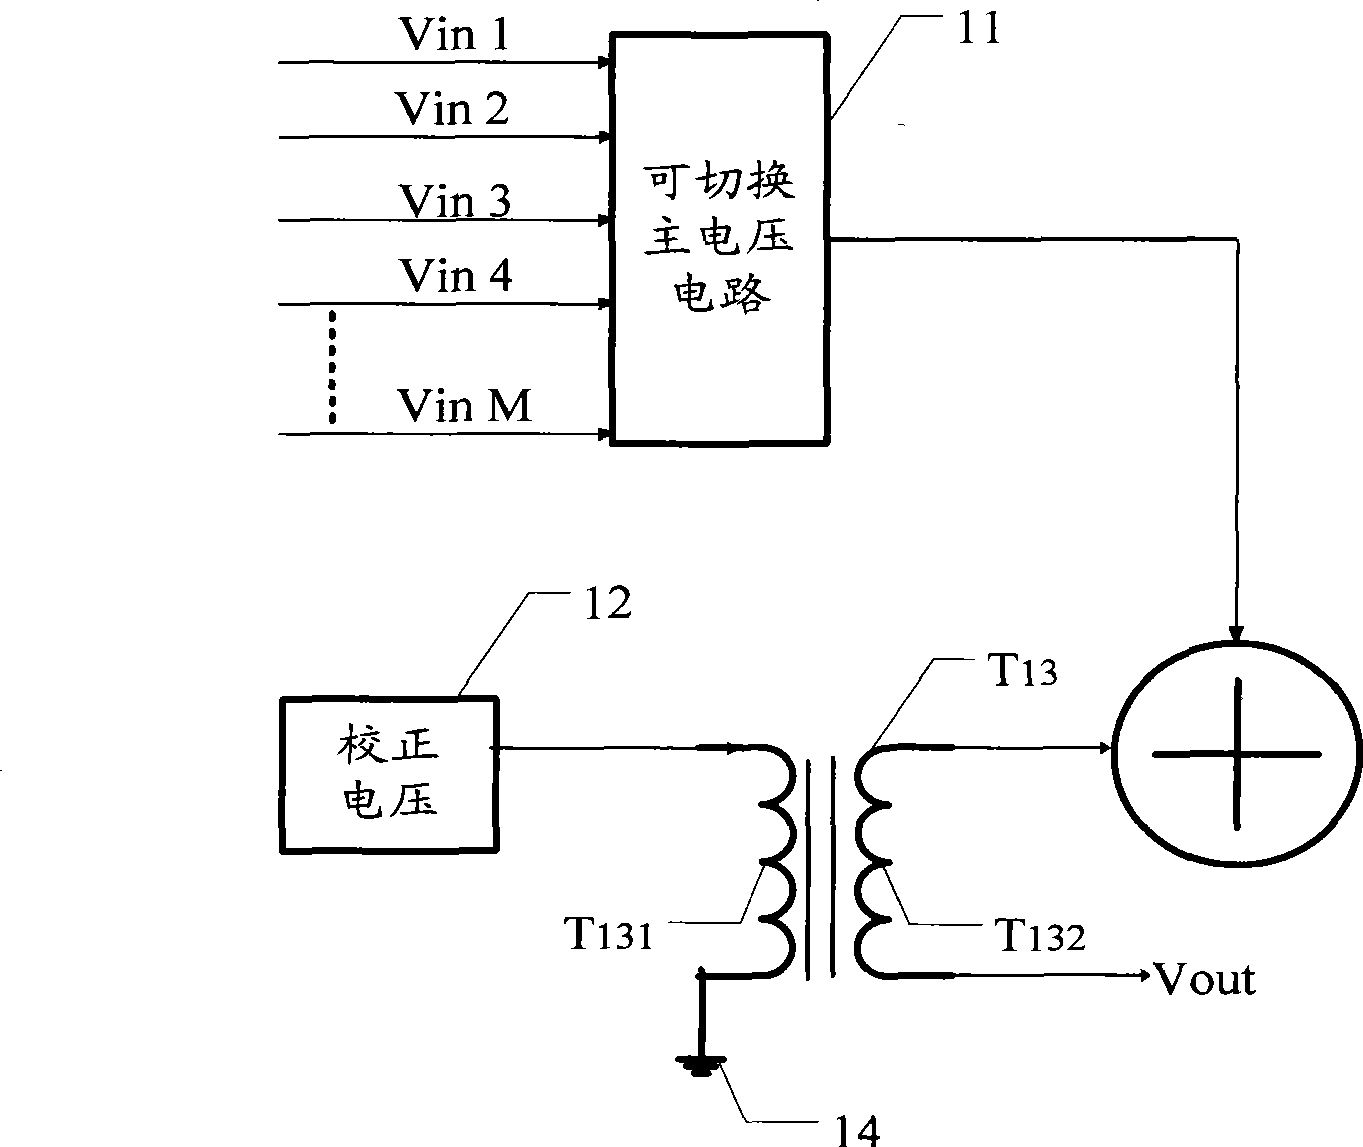 Power supply architecture capable of dynamic regulation in a wide region